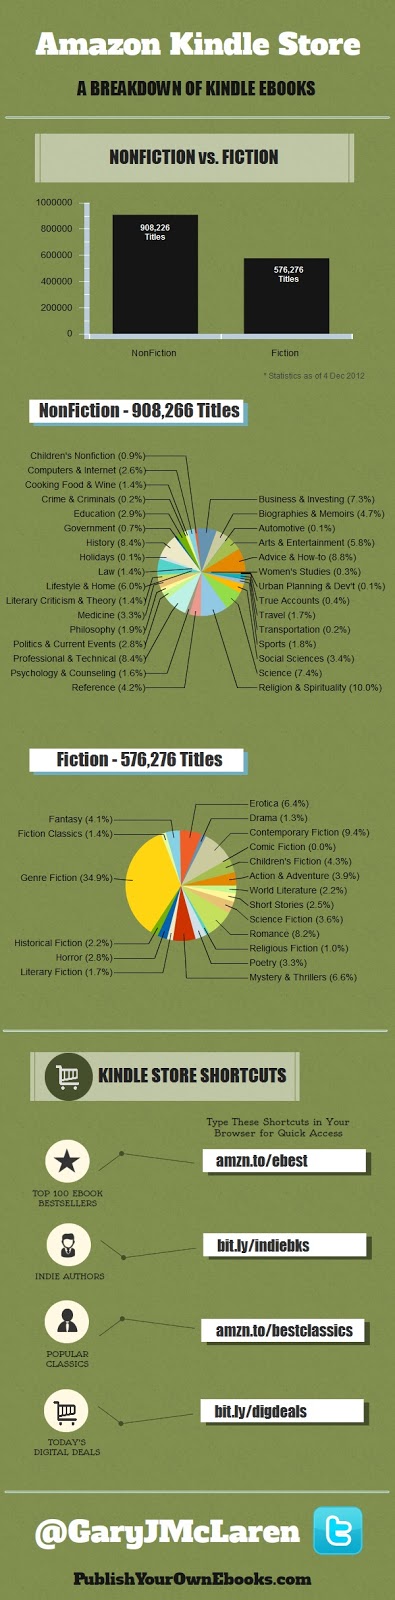 15. Amazon Kindle books by category